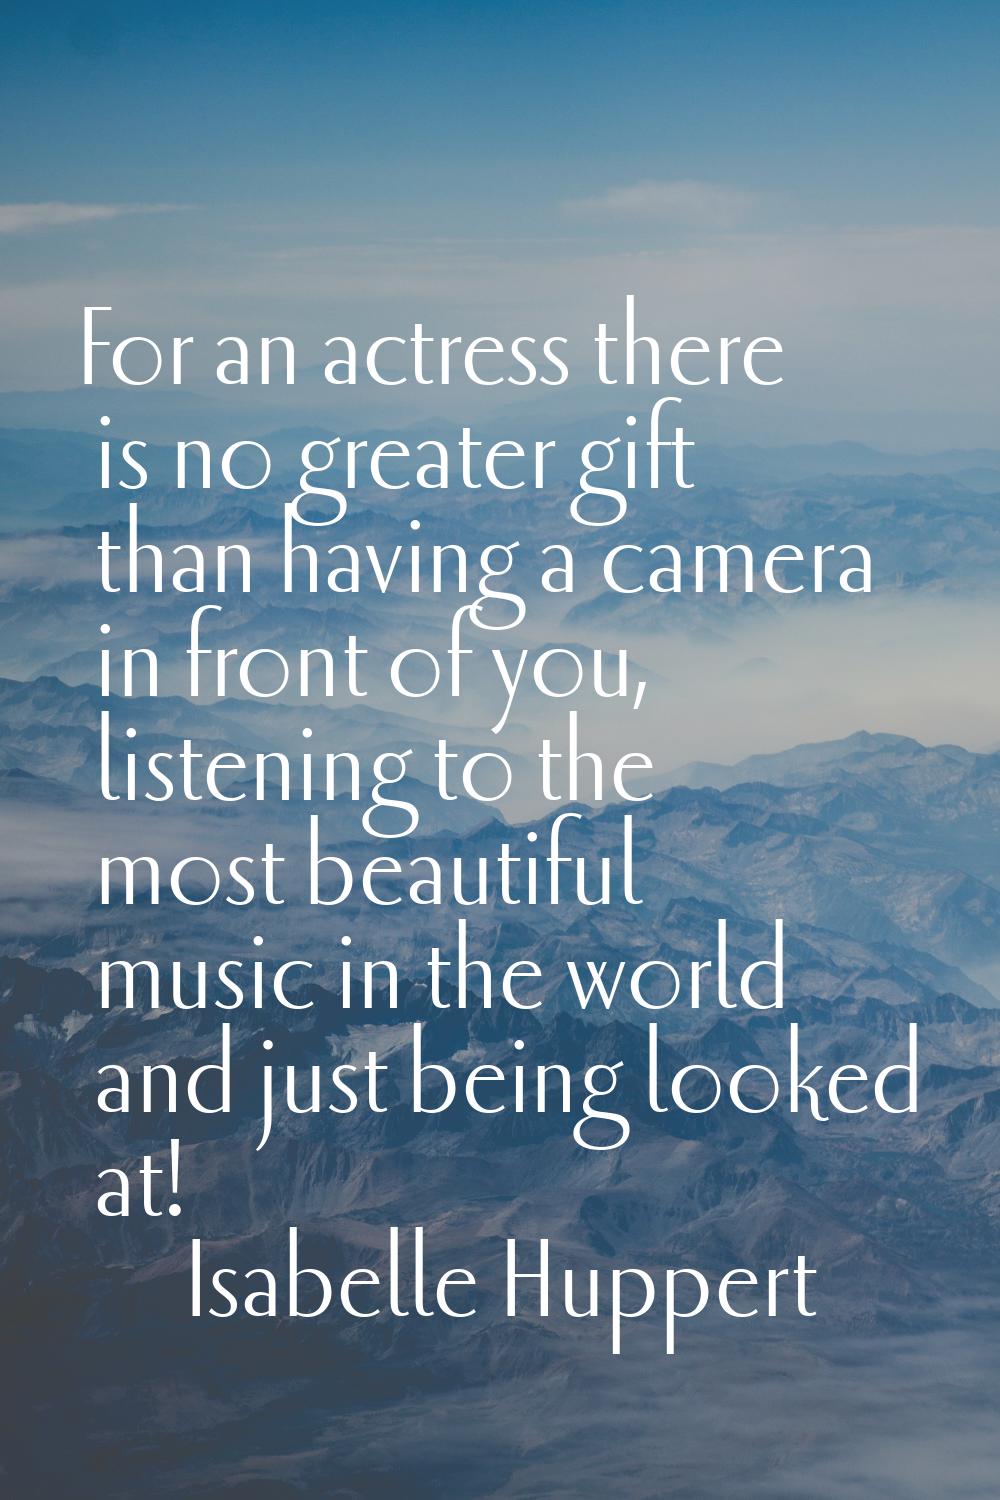 For an actress there is no greater gift than having a camera in front of you, listening to the most